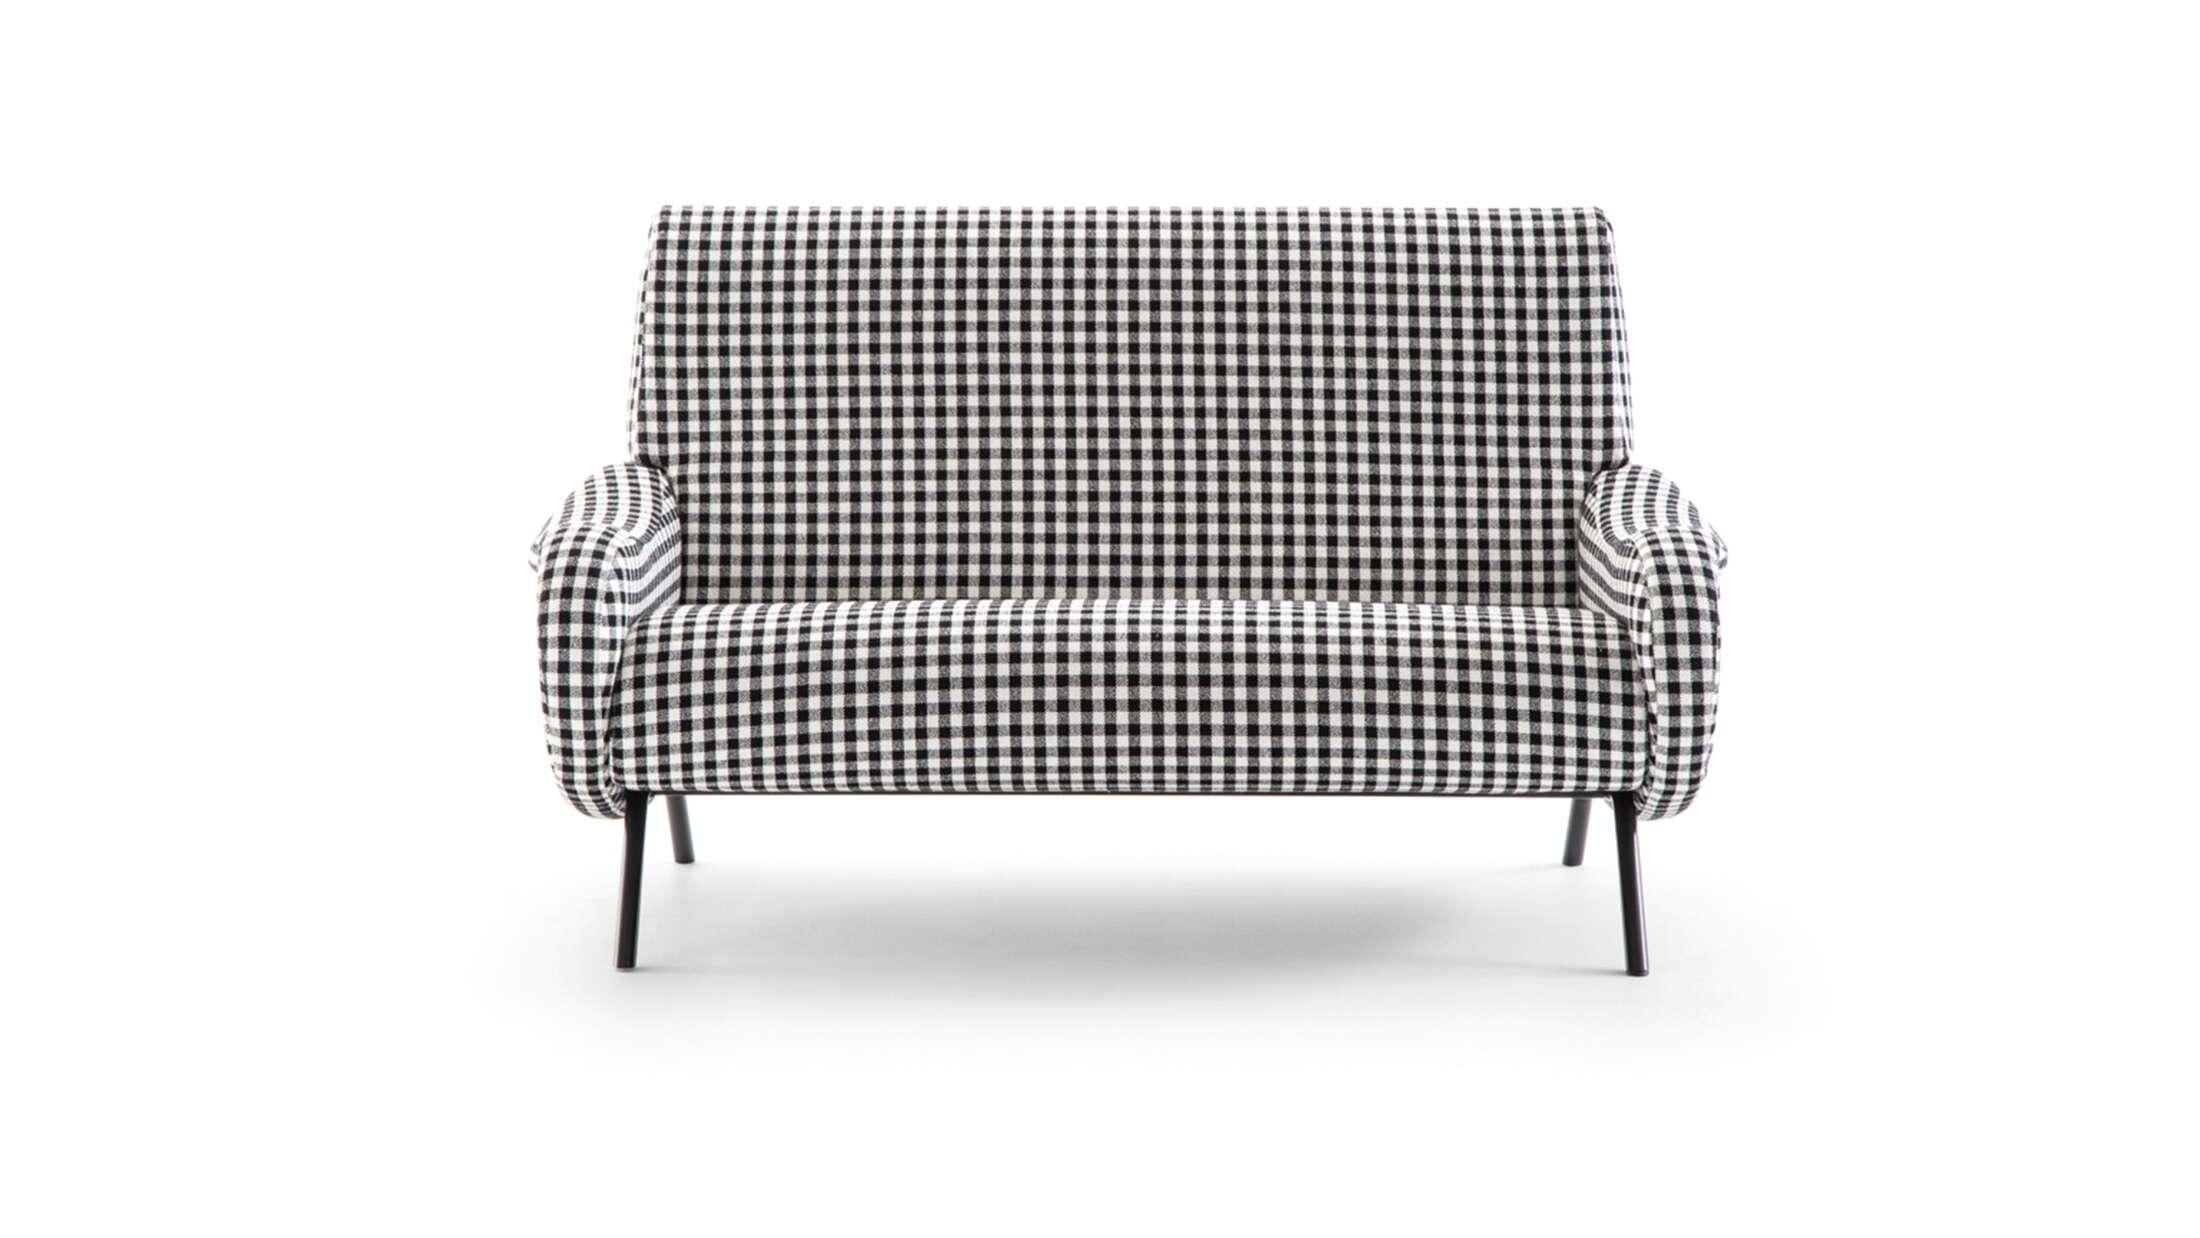 Sofa designed by Marco Zanuso in 1951, relaunched in 2016. Manufactured by Cassina in Italy. Price given applies to the piece as shown in the first picture. Prices vary dependent on the chosen color/fabric. 